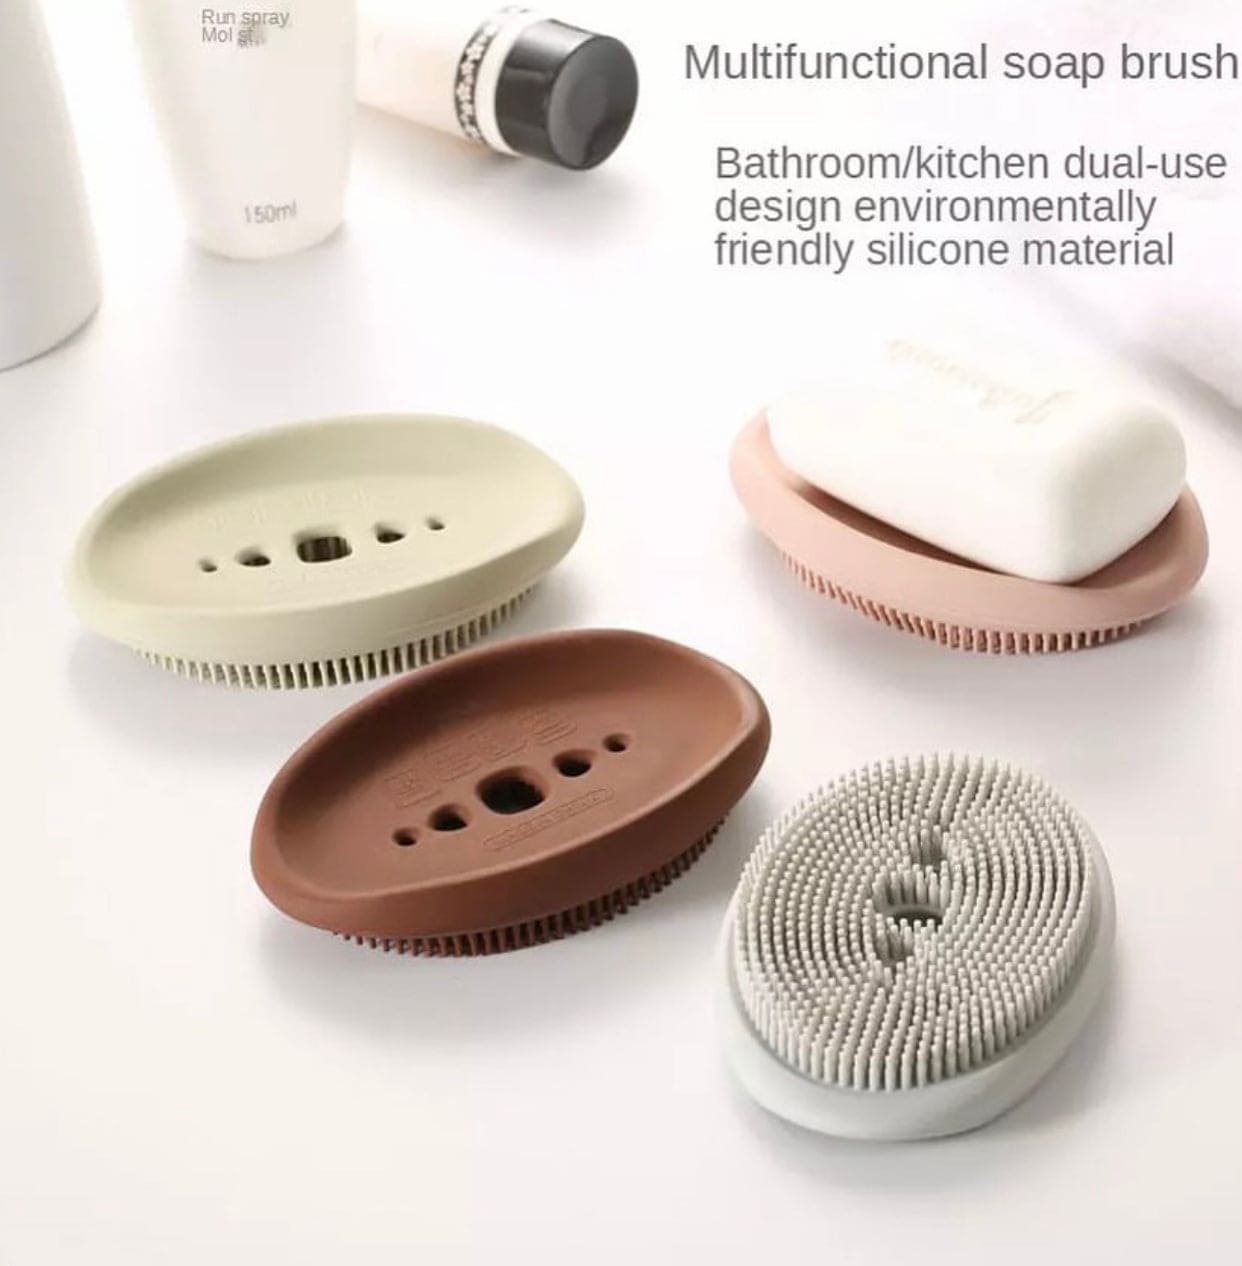 Creative Double Sided Flexible Multifunctional Silicone Soap Holder, Flexible Multifunctional Bathroom Kitchen Soap Dish, Cleaning Brush Soap Storage Box